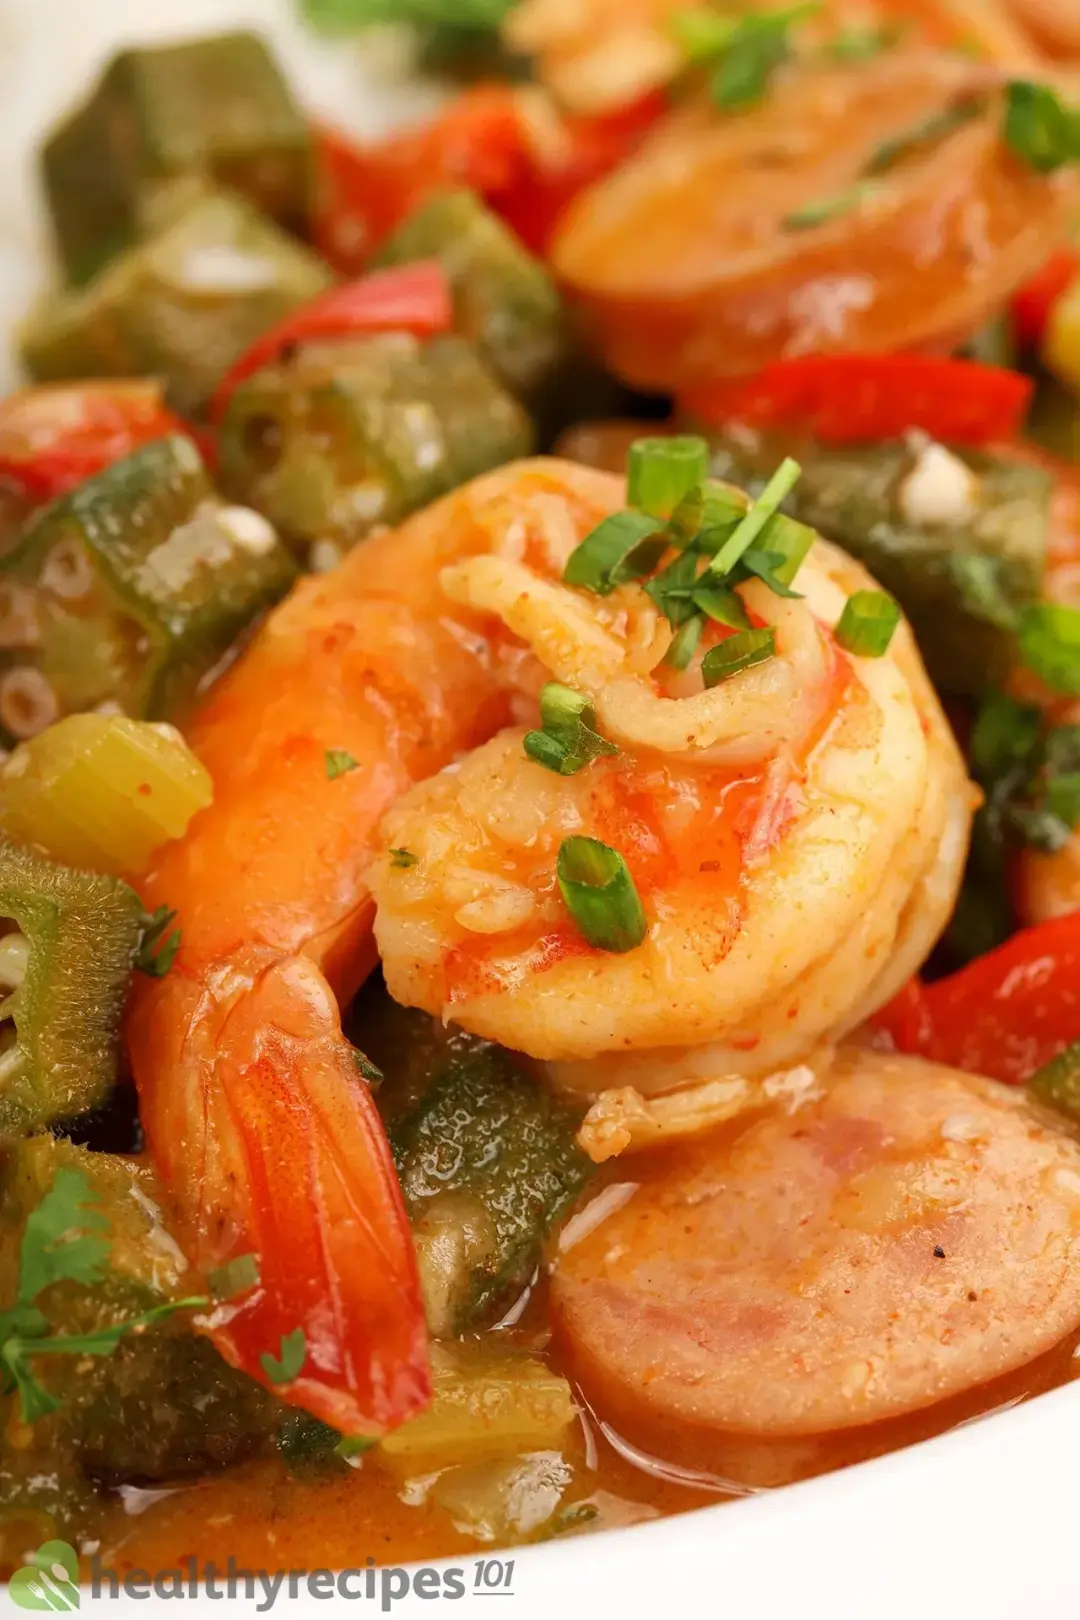 How to Store and Reheat Gumbo